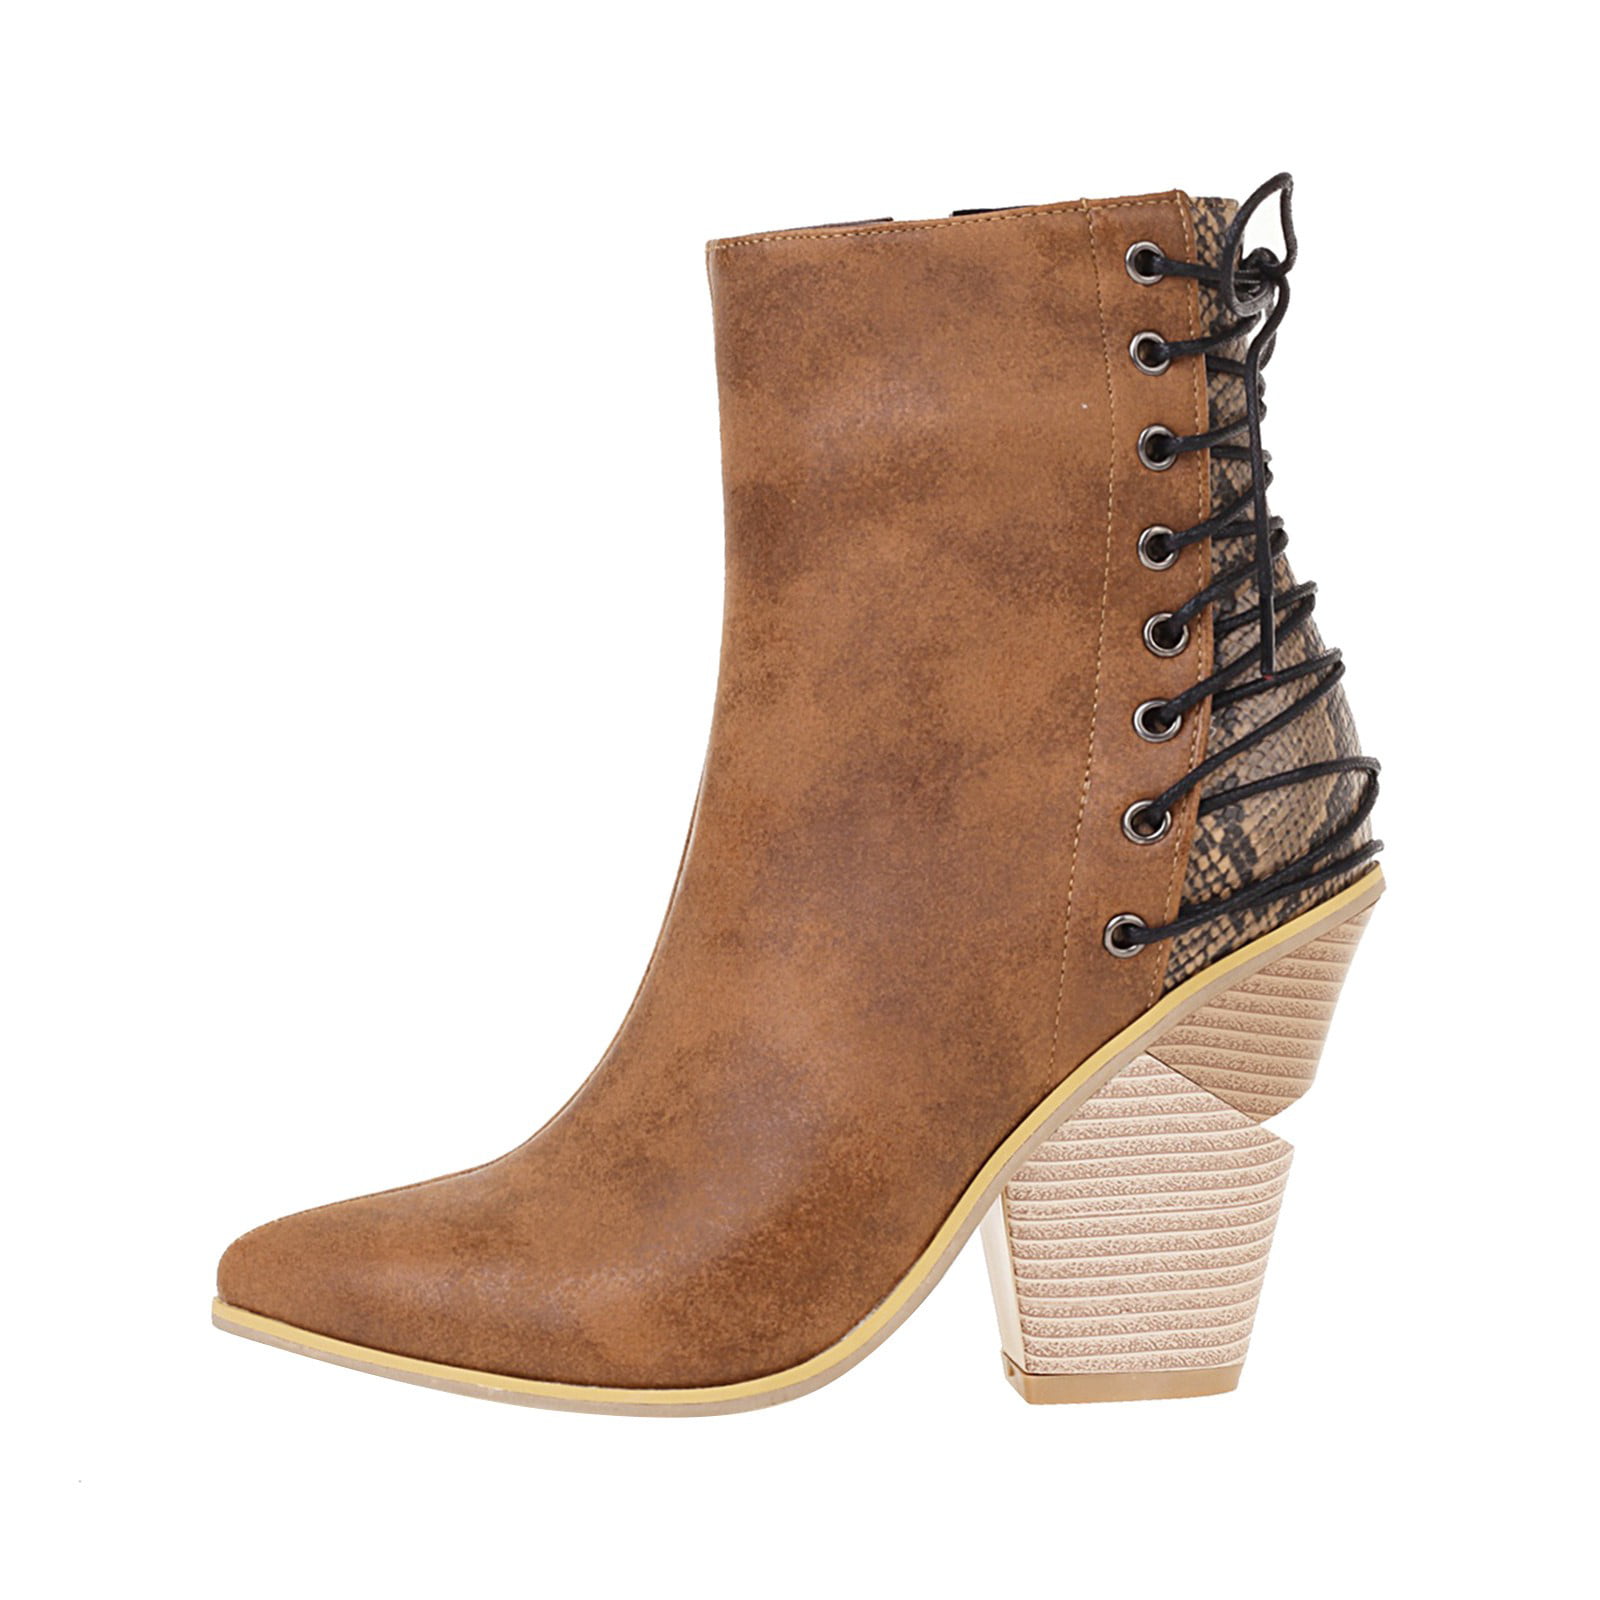 Brown Boot Heels | Brown boots, Heeled boots, Boots